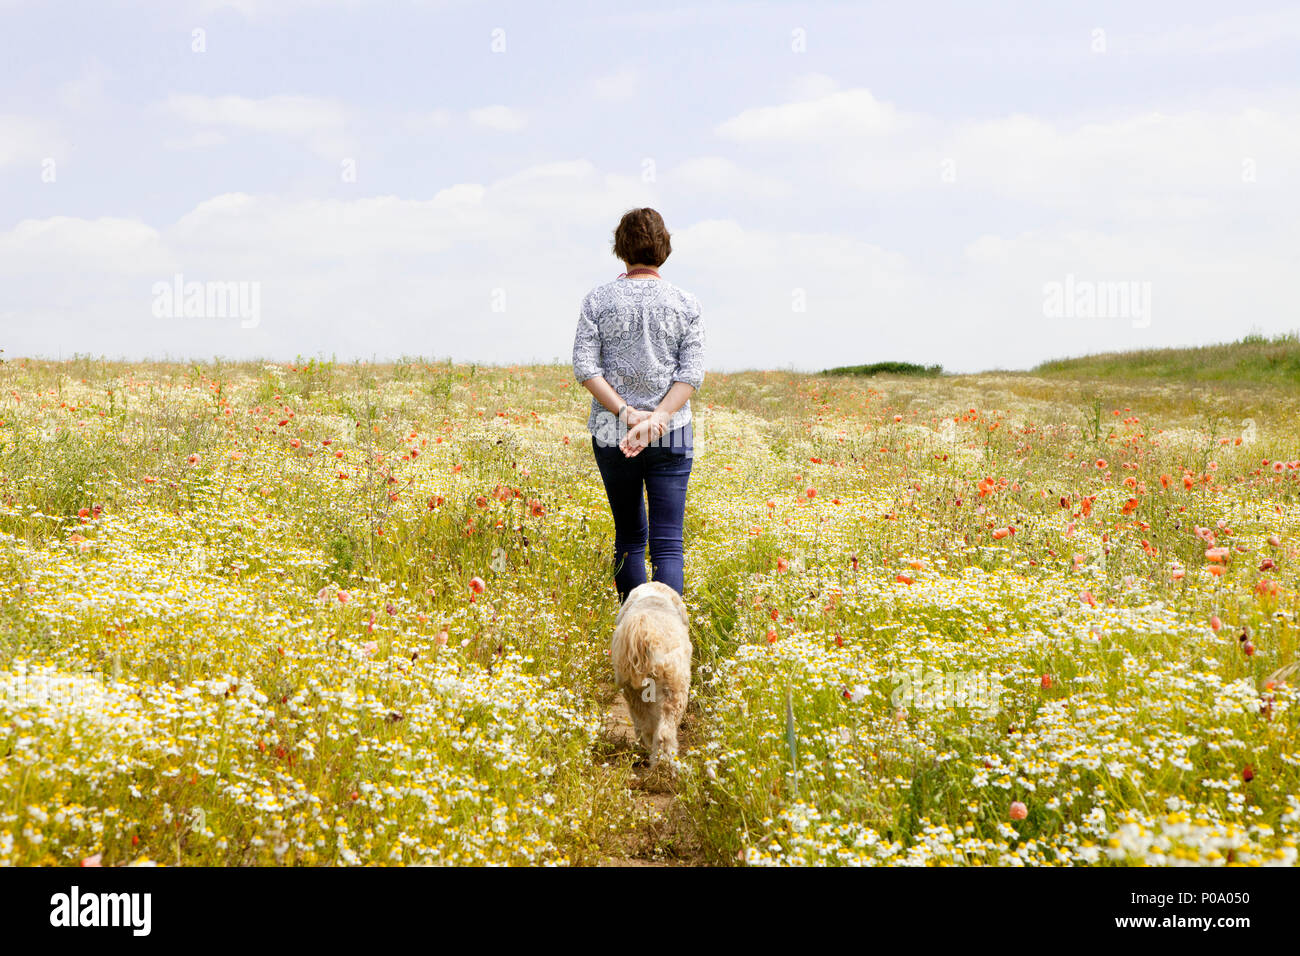 Walking on a summers day through a field of poppies and camomile with a dog nr Guildford Surrey Stock Photo